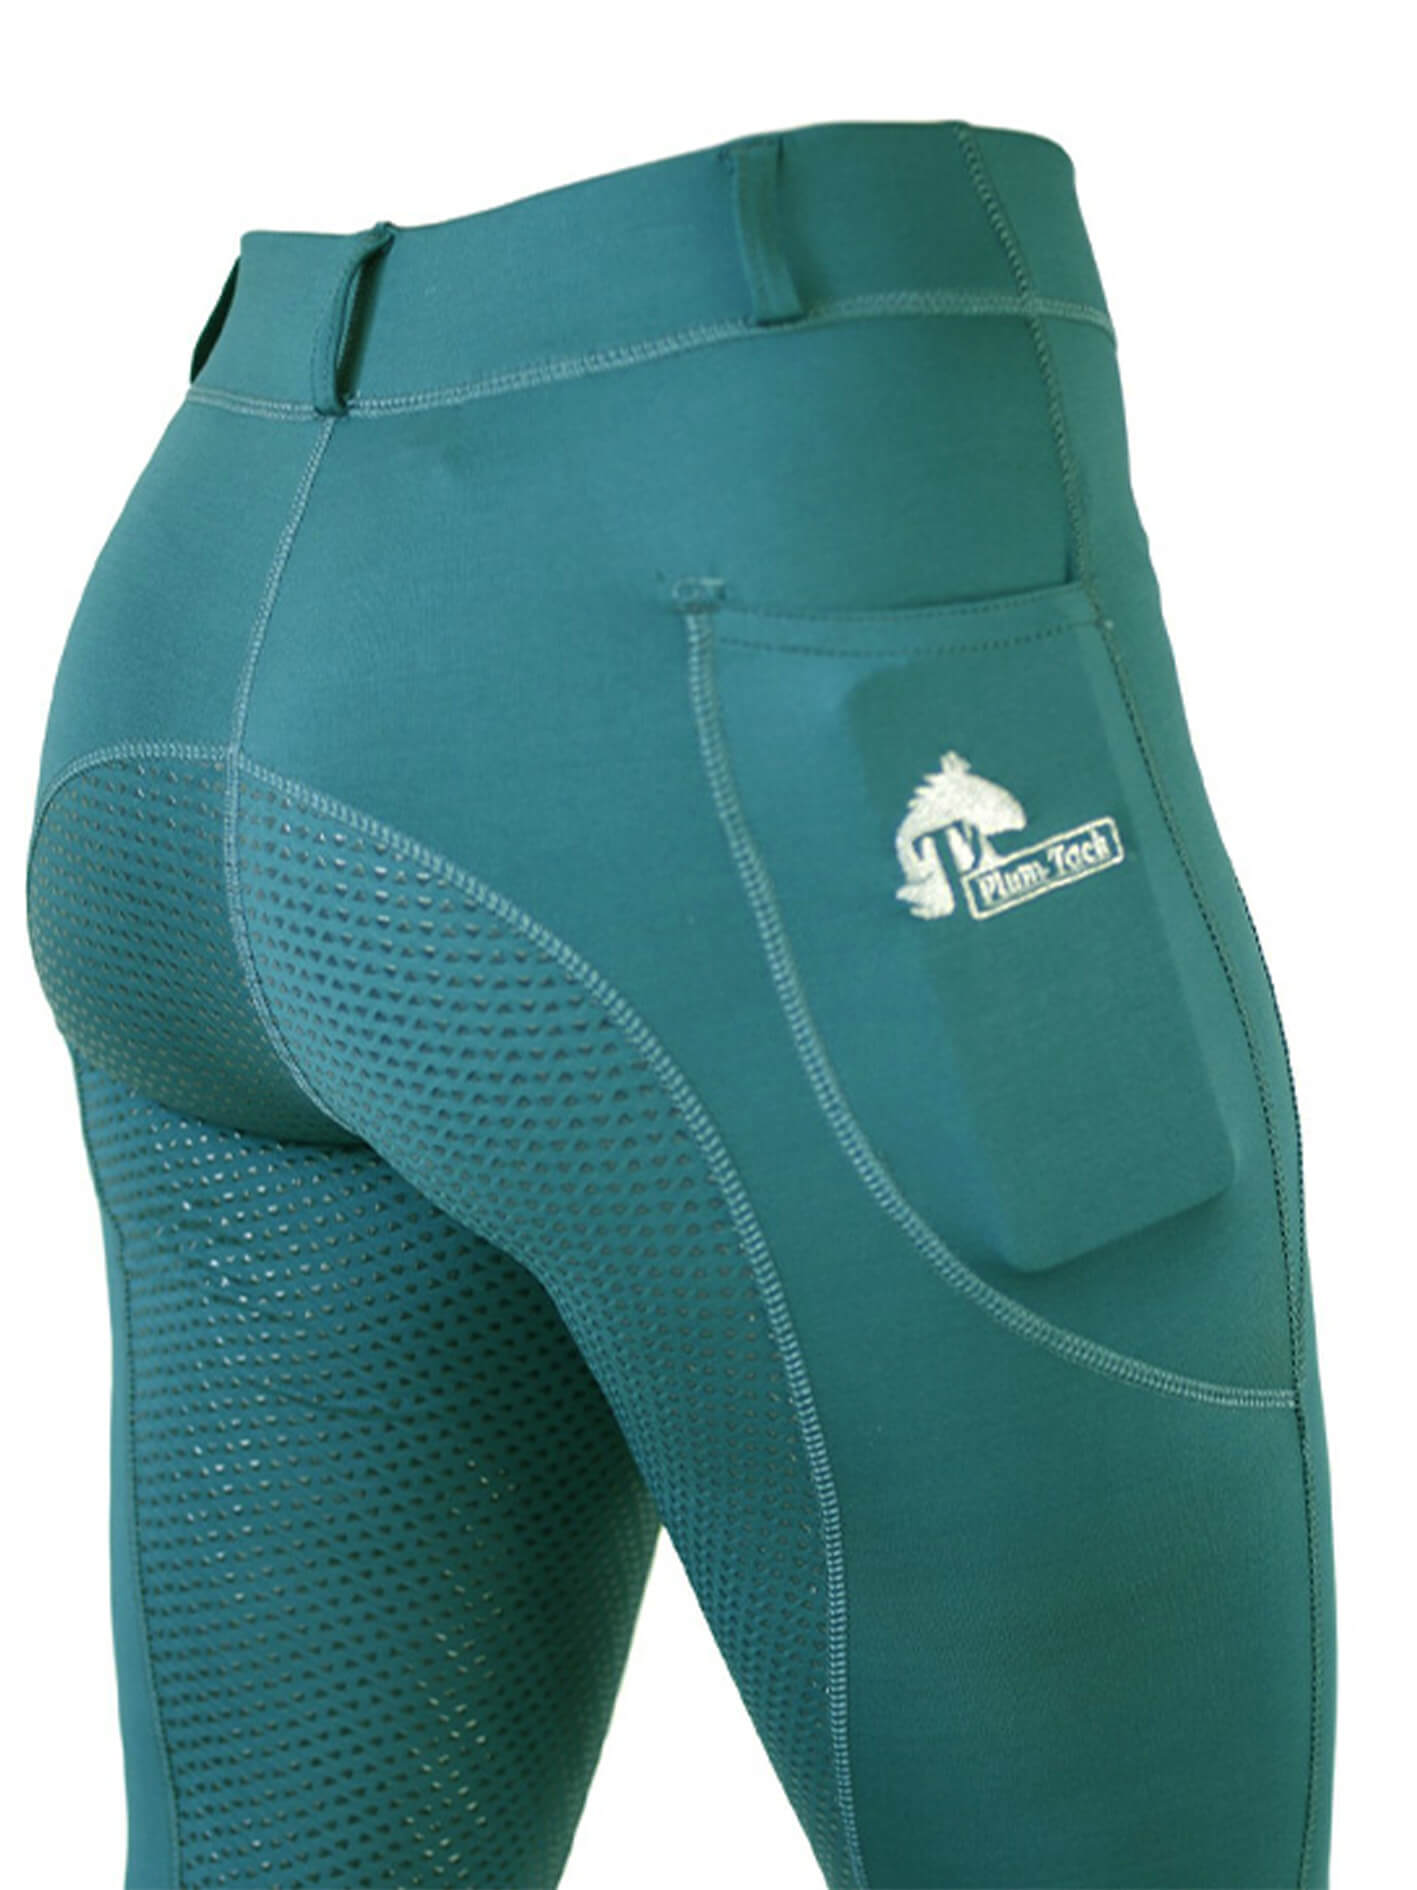 Teal horse riding tights with mesh panels and logo detail.